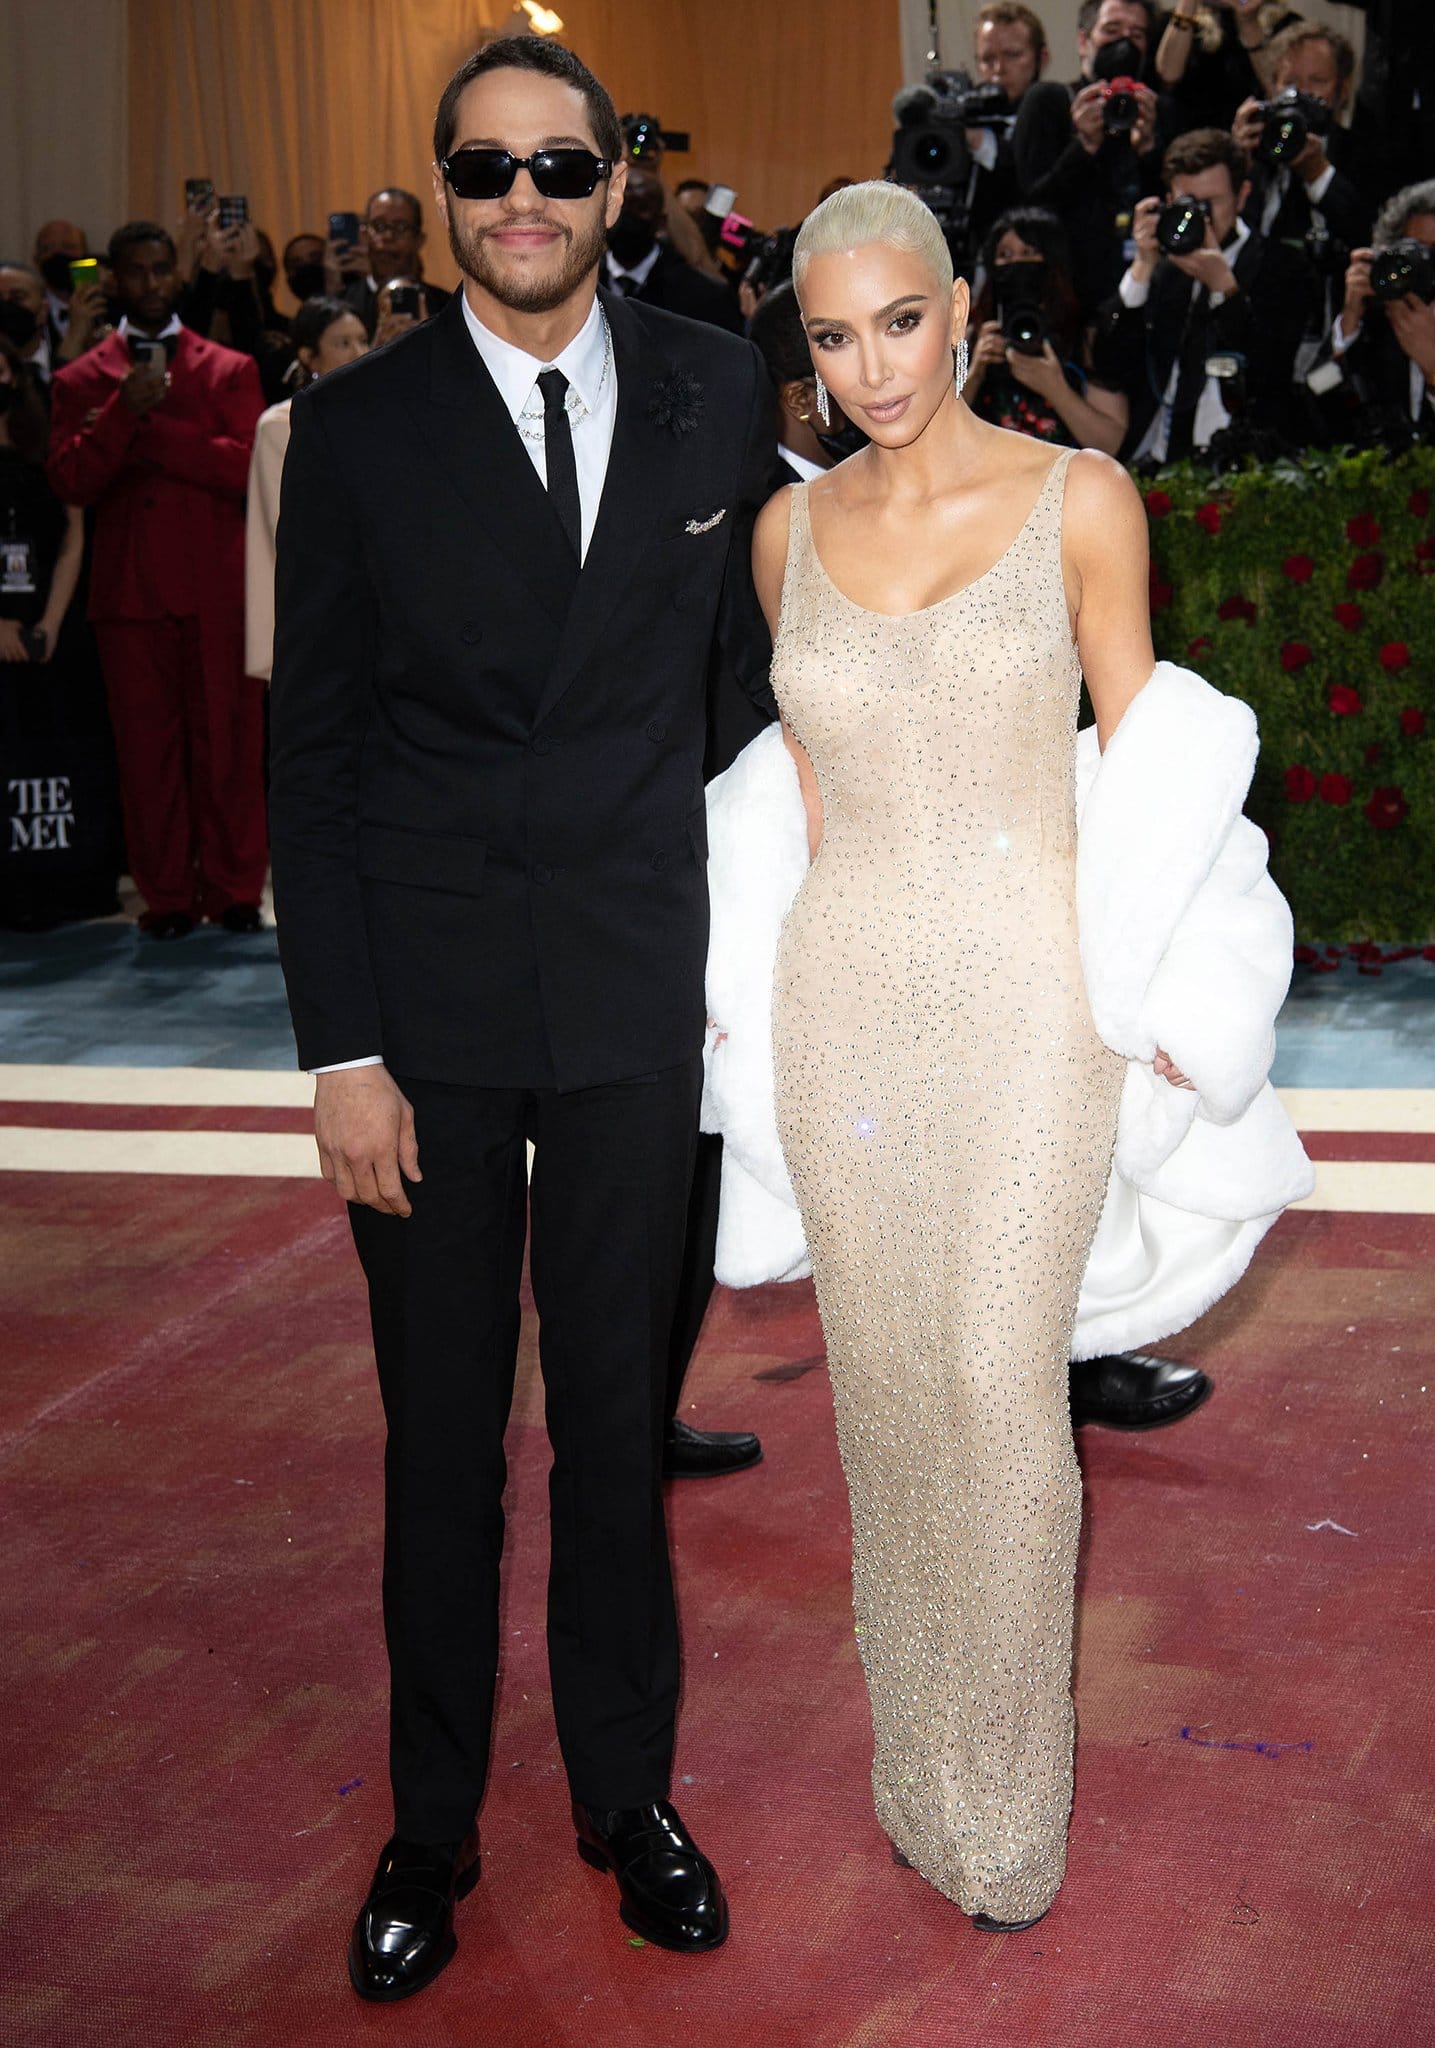 Joined by her boyfriend Pete Davidson, Kim Kardashian changed into a replica dress after walking up the steps at the Met Gala